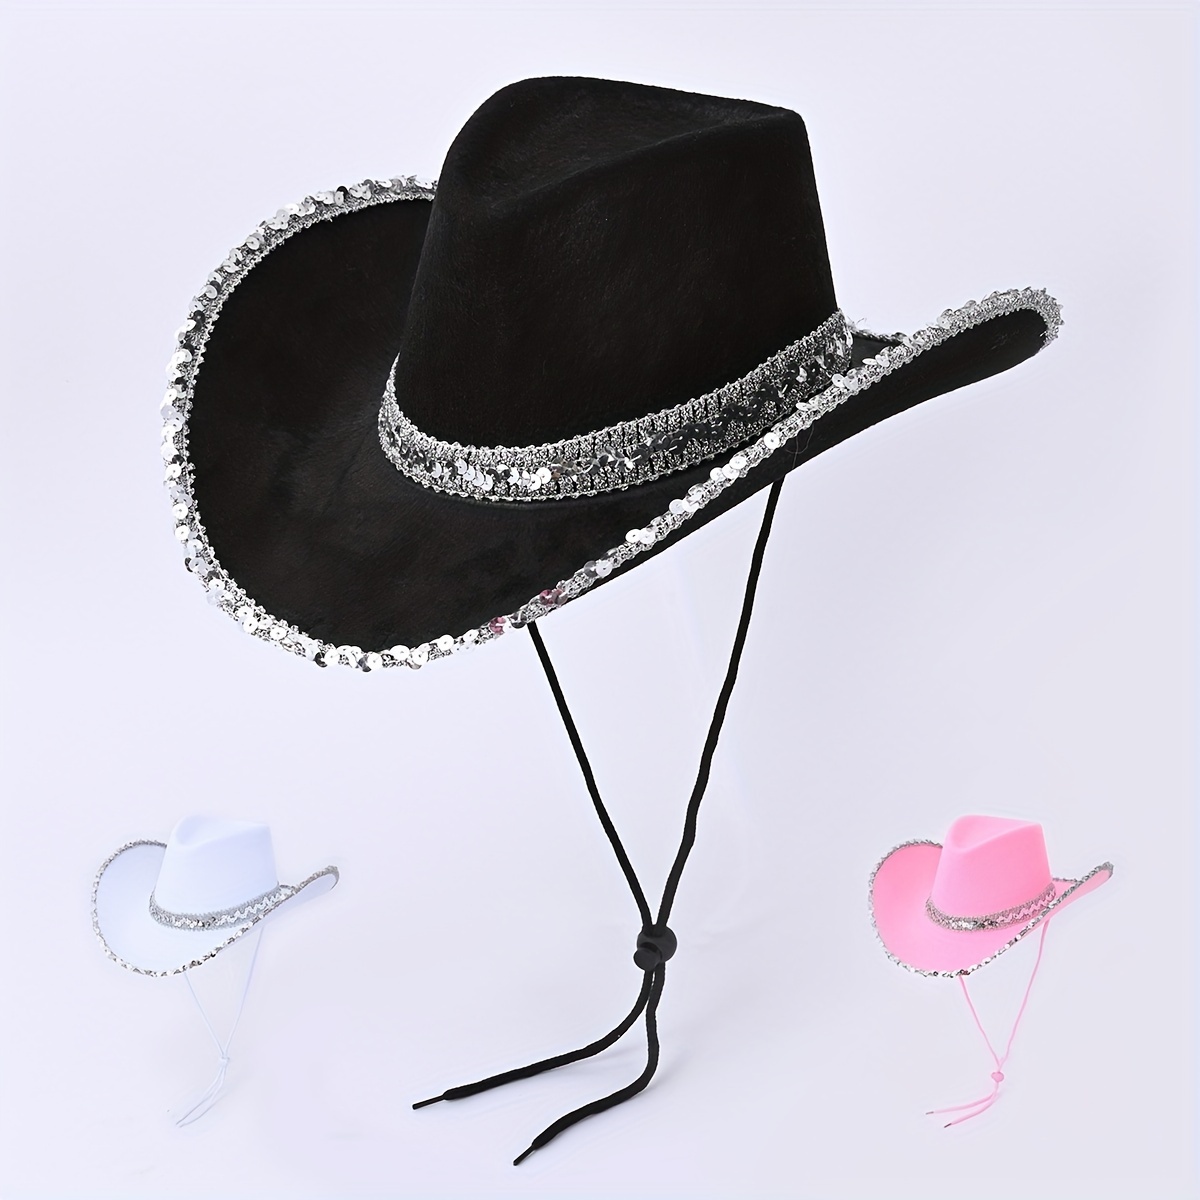 Western Decor Cowgirl Costume White Cowboy Hat Men Feather Crystal